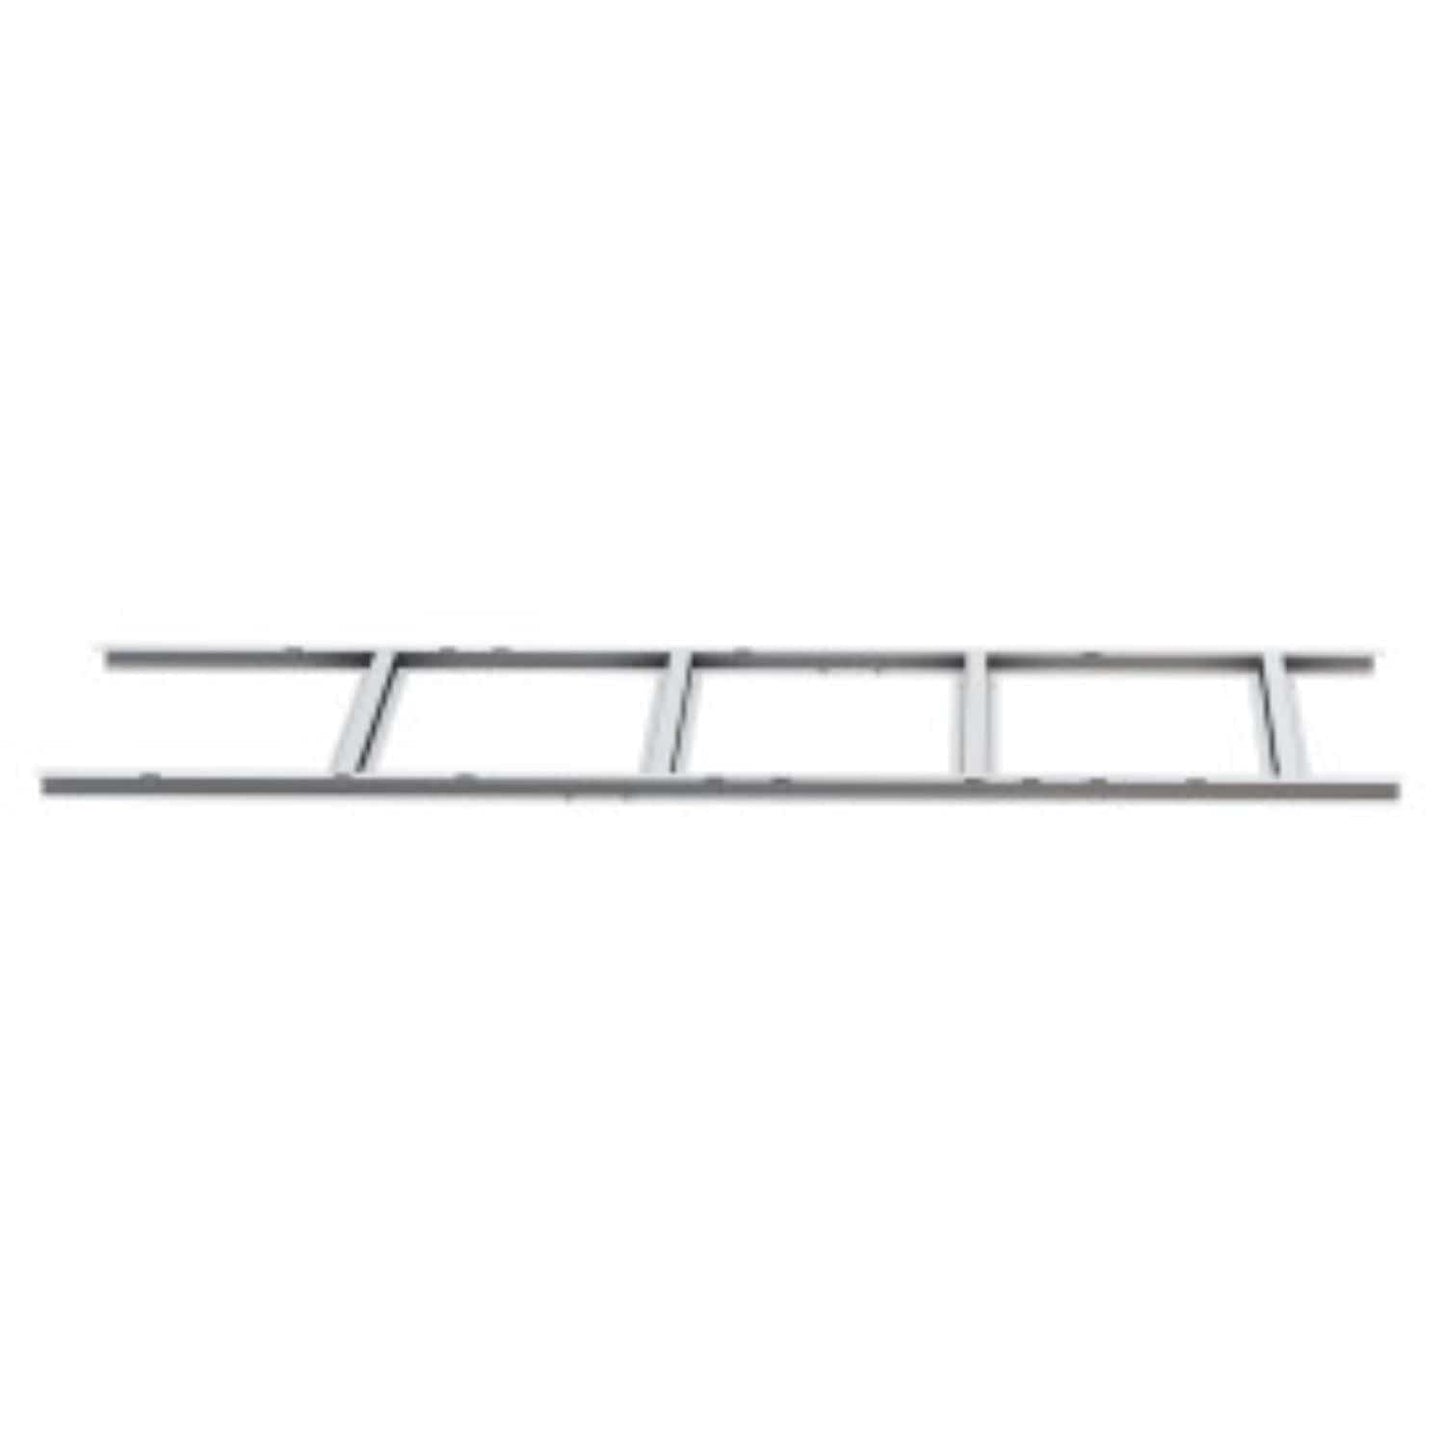 Arrow Shed Accessories Arrow | Floor Frame Kit for Arrow Elite Sheds 6x4, 8x4, and 10x4 ft. FKE01